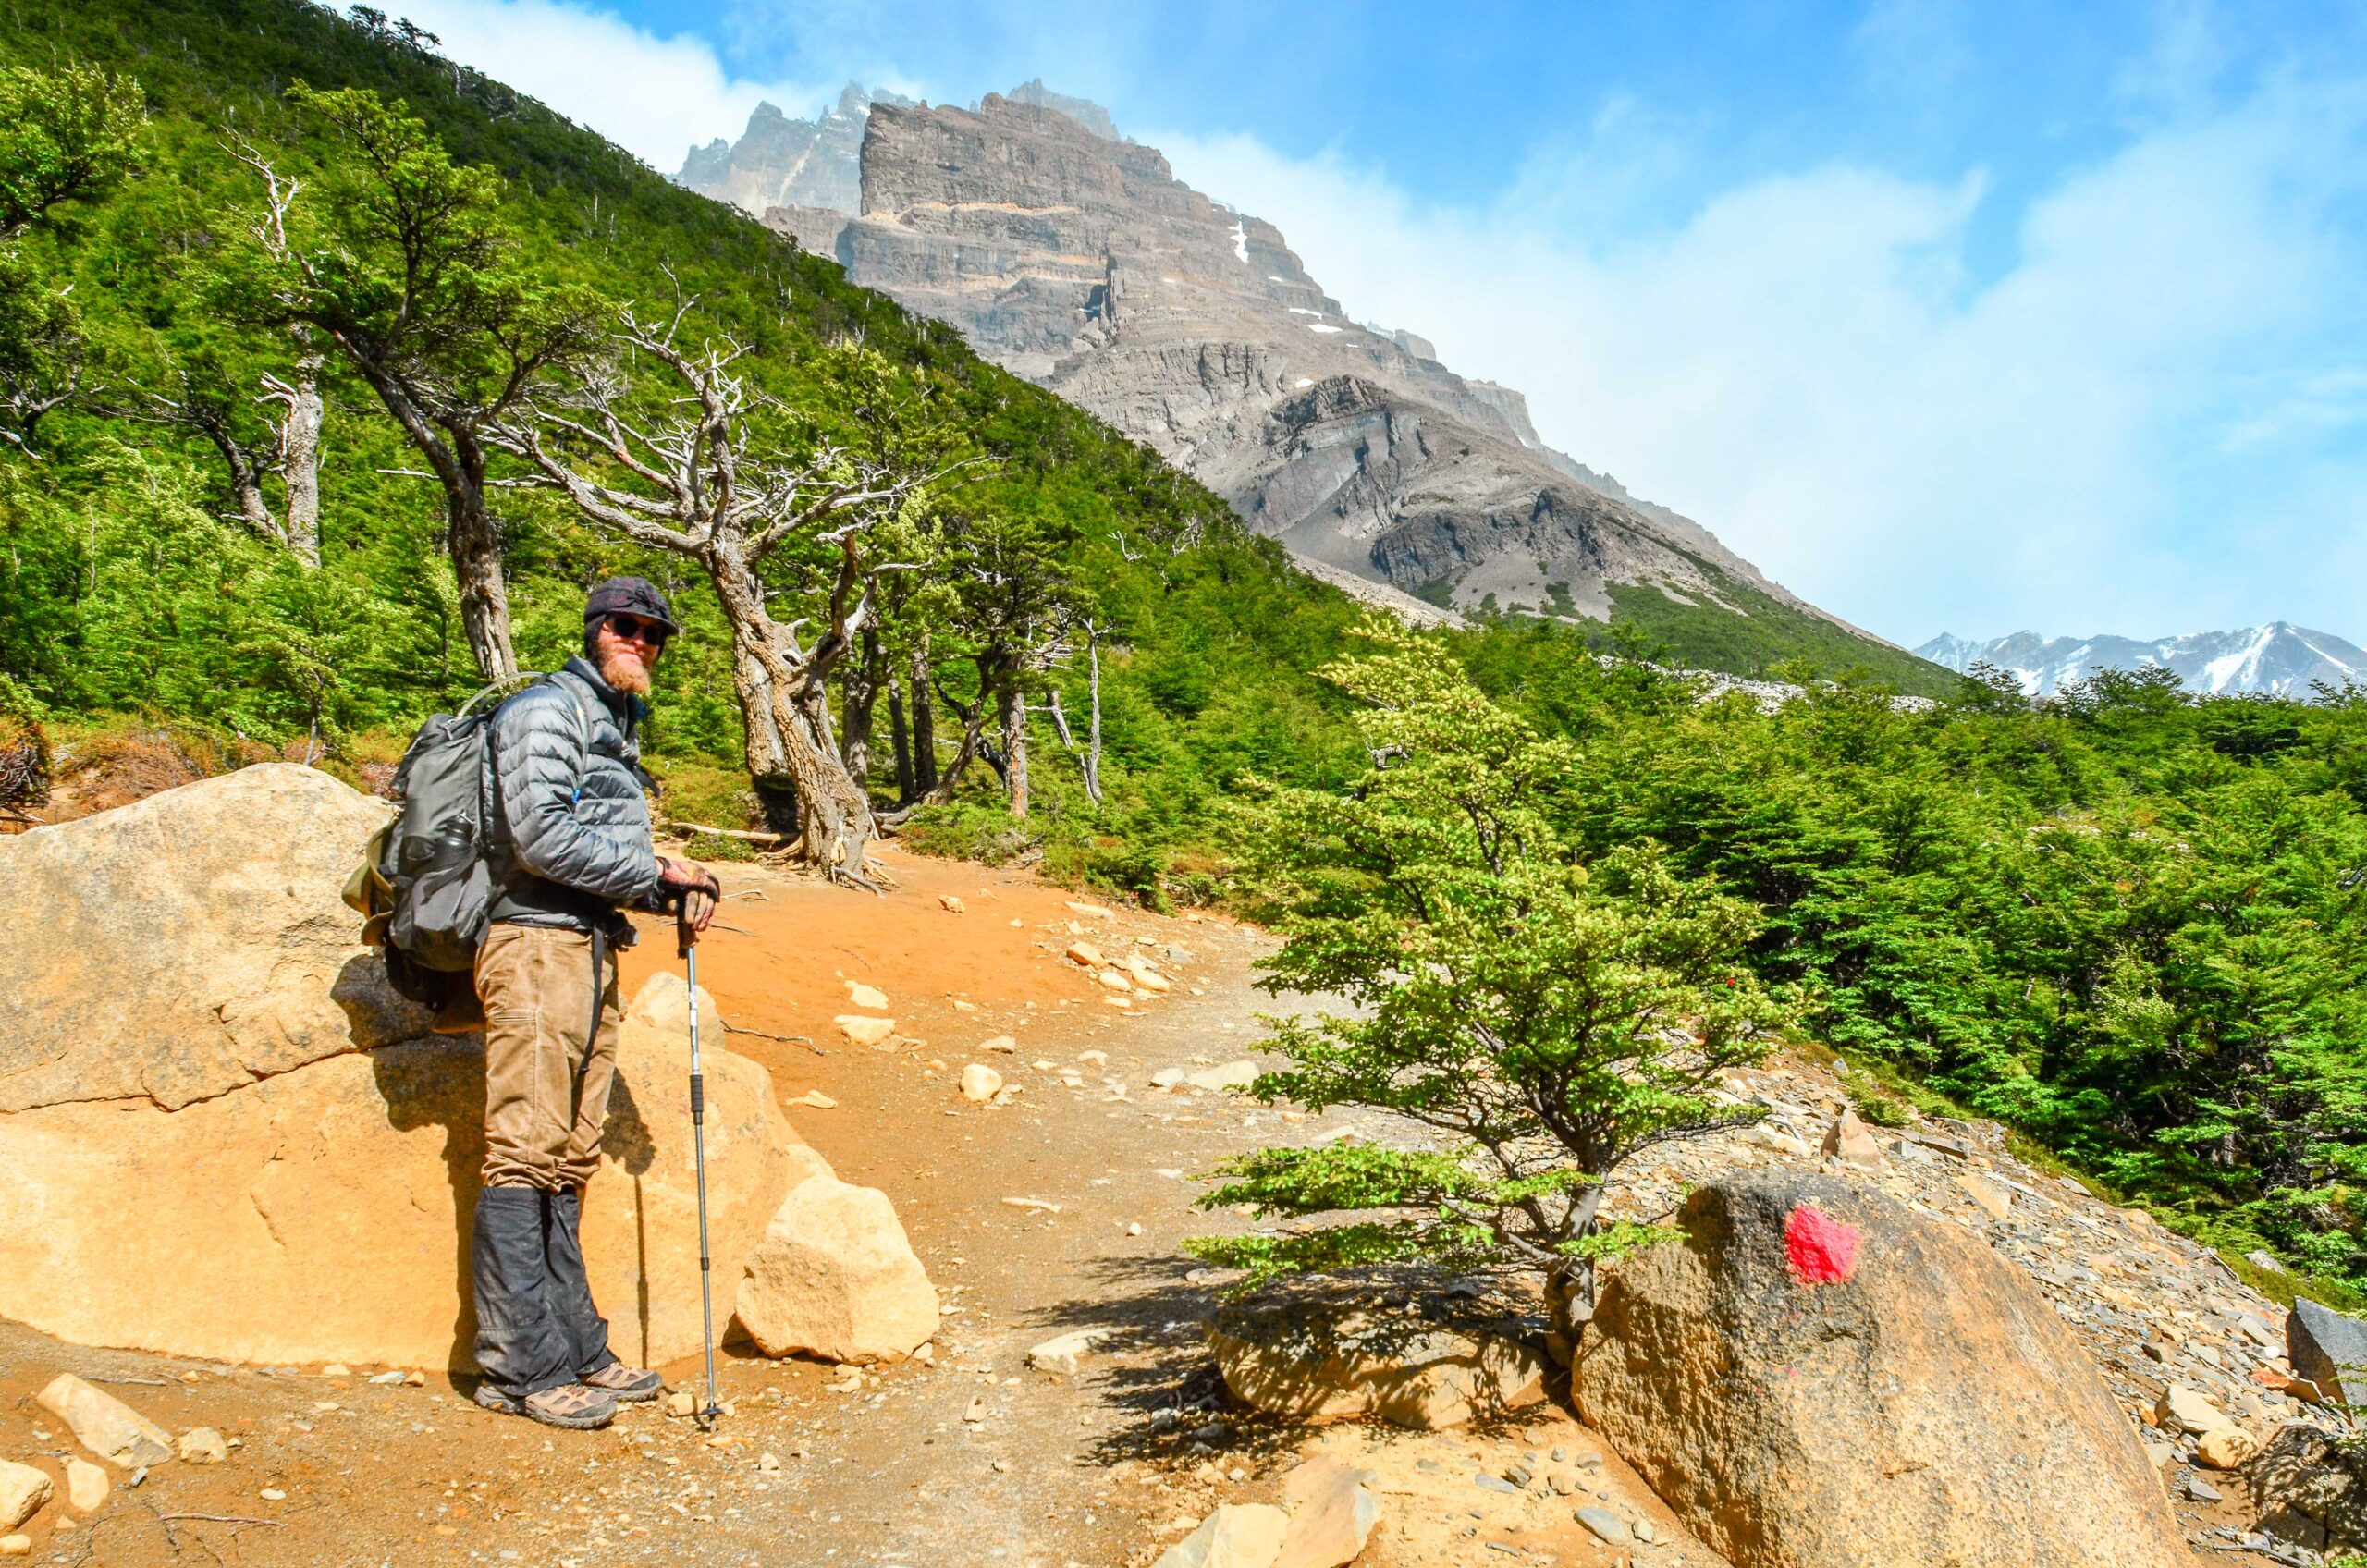 How We Prepared for a 2-Day Hike in Torres Del Paine National Park